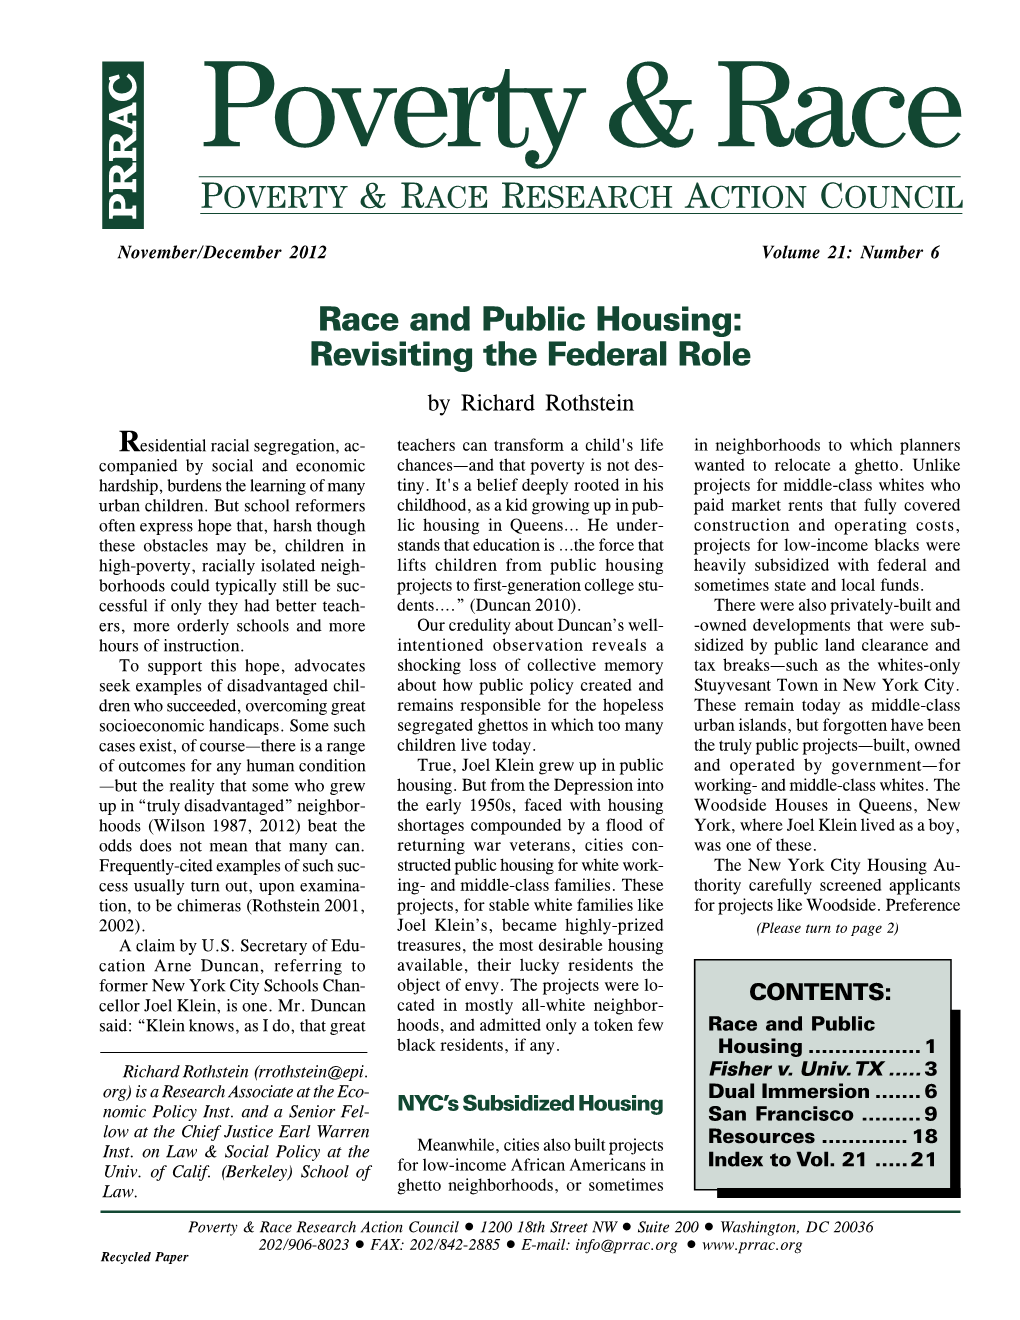 Race and Public Housing: Revisiting the Federal Role by Richard Rothstein